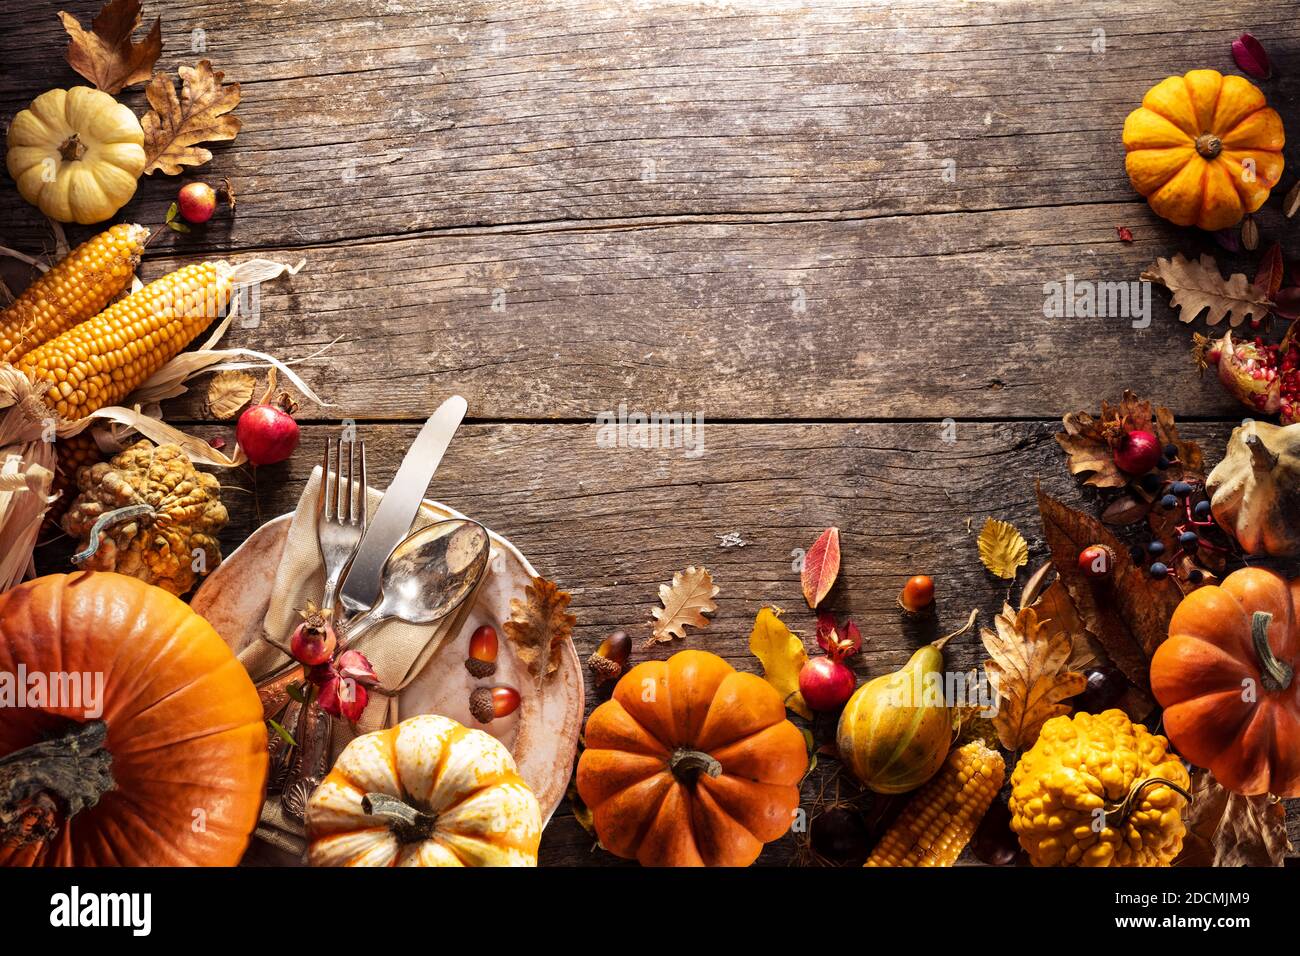 Thanksgiving Board - Table Setting With Silverware And Pumpkins On Aged Wooden Plank Stock Photo